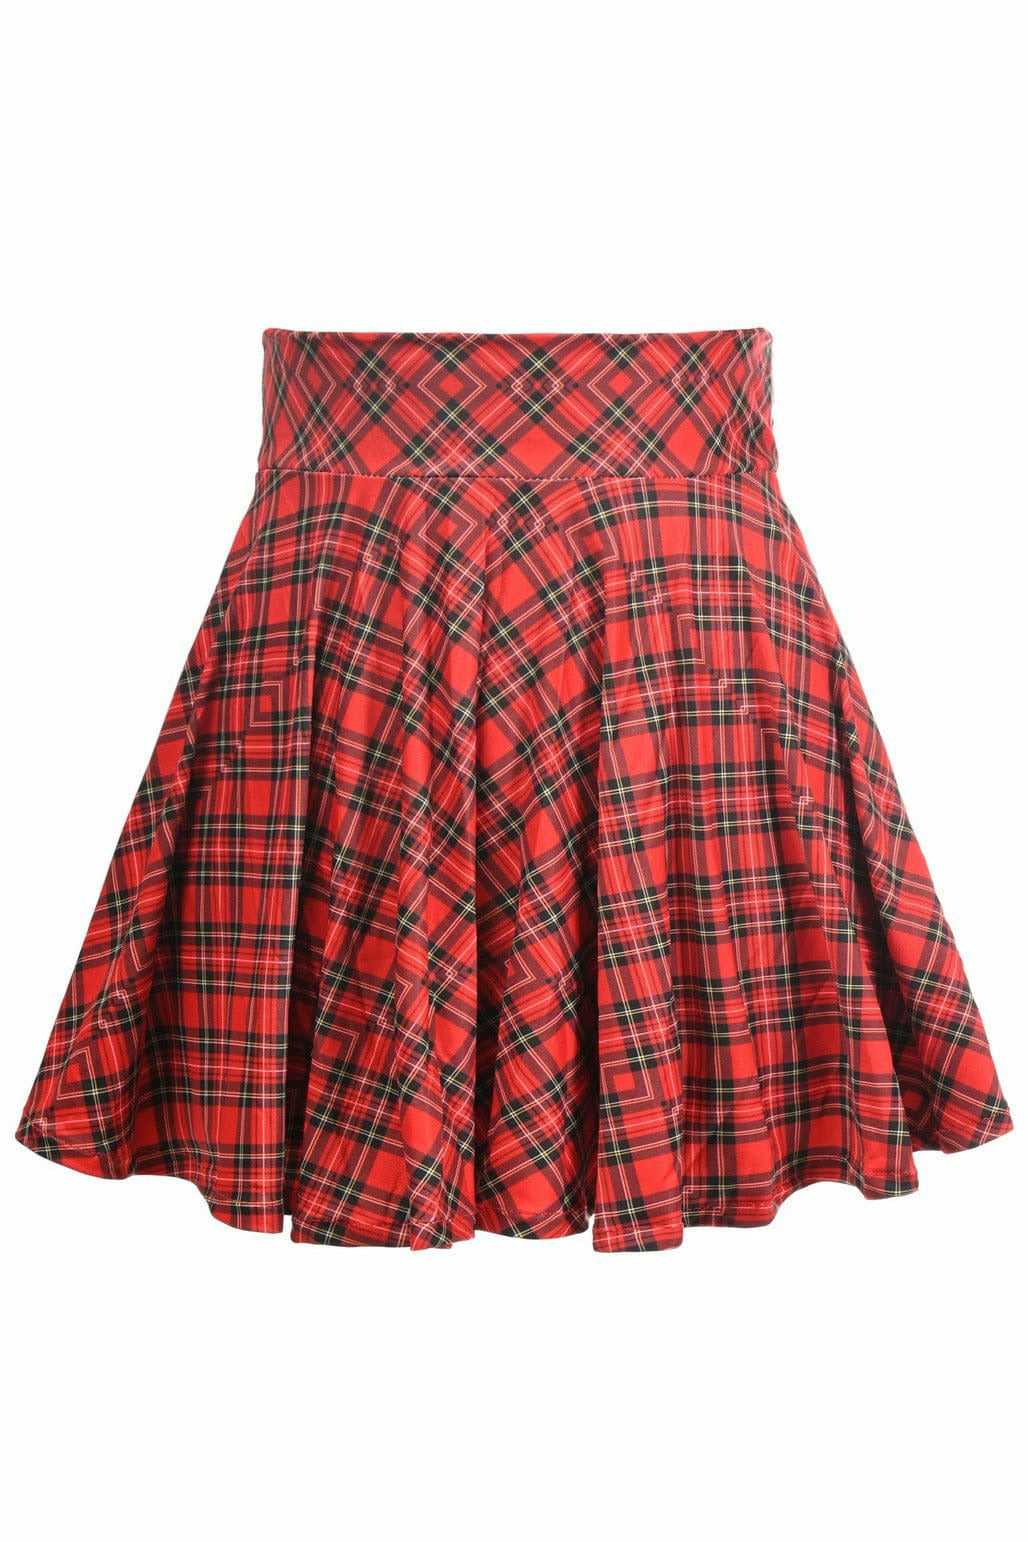 Daisy Corsets Red Plaid Stretch Lycra Skirt in Size XS, S, M, L, XL, 2X, 3X, 4X, 5X, or 6X